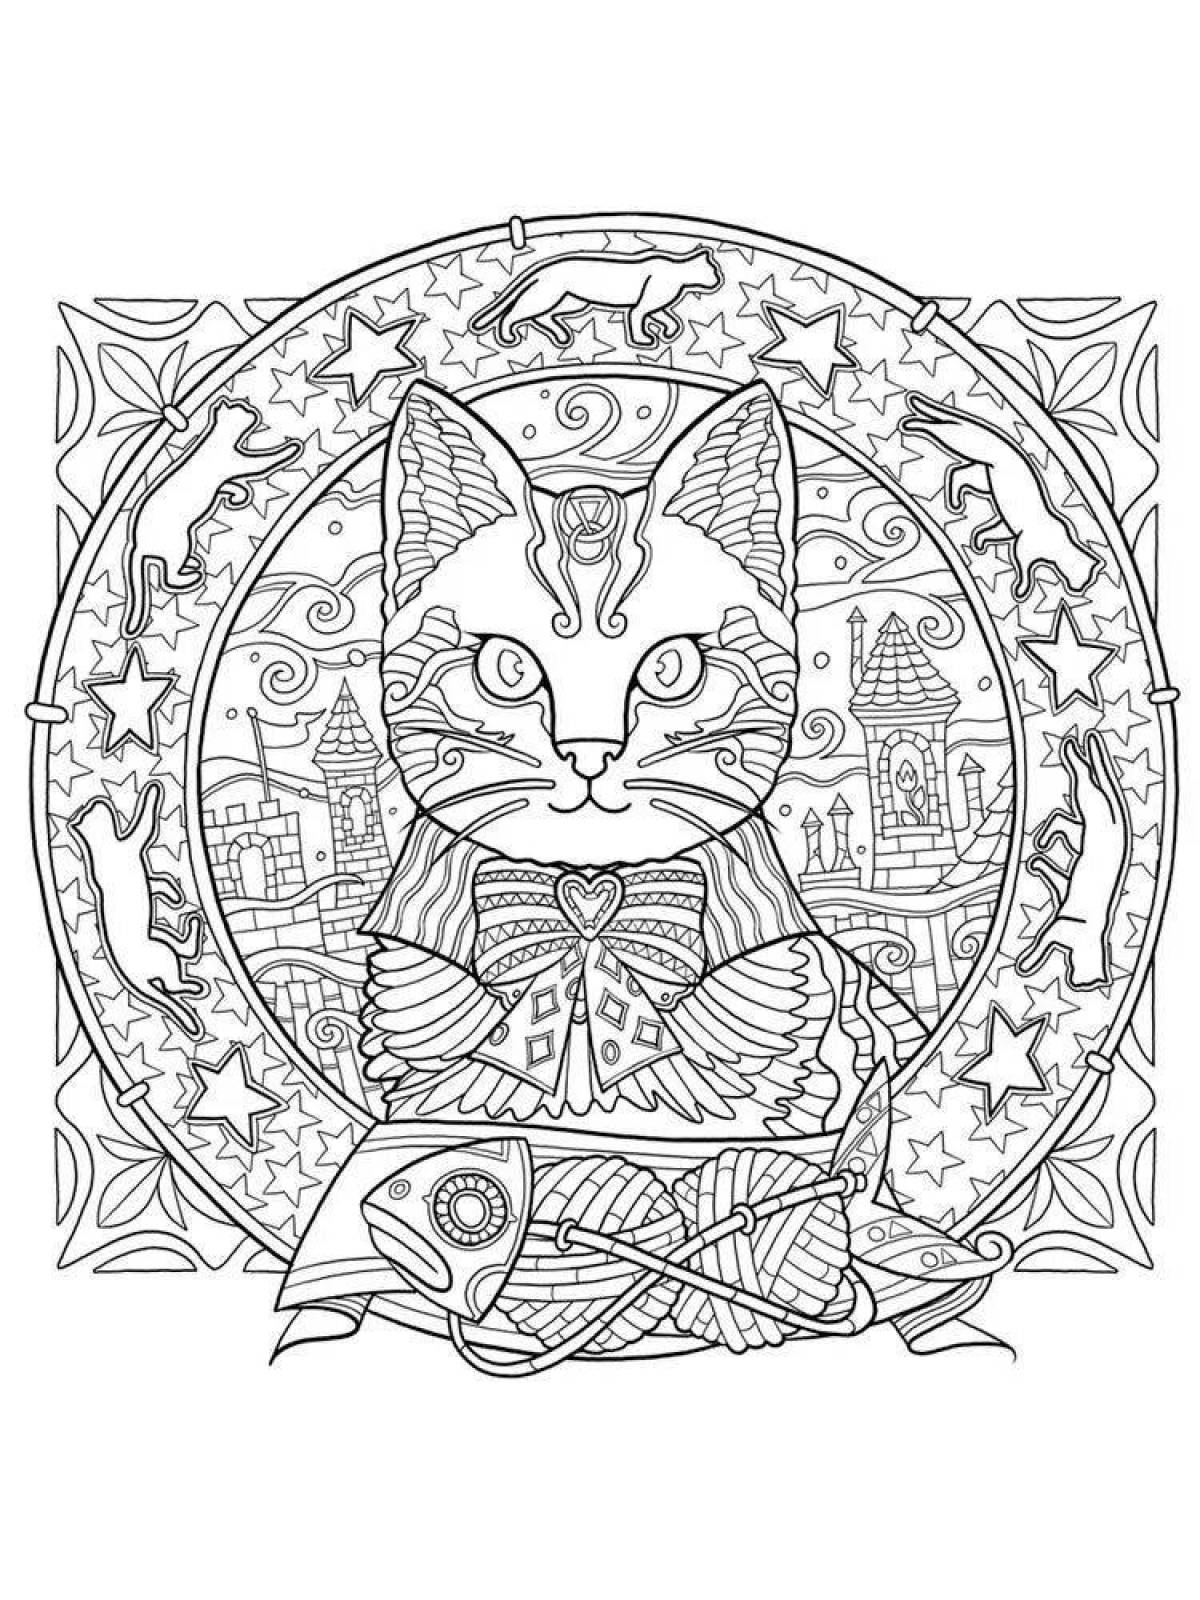 Coloring book antistress grand cat therapy